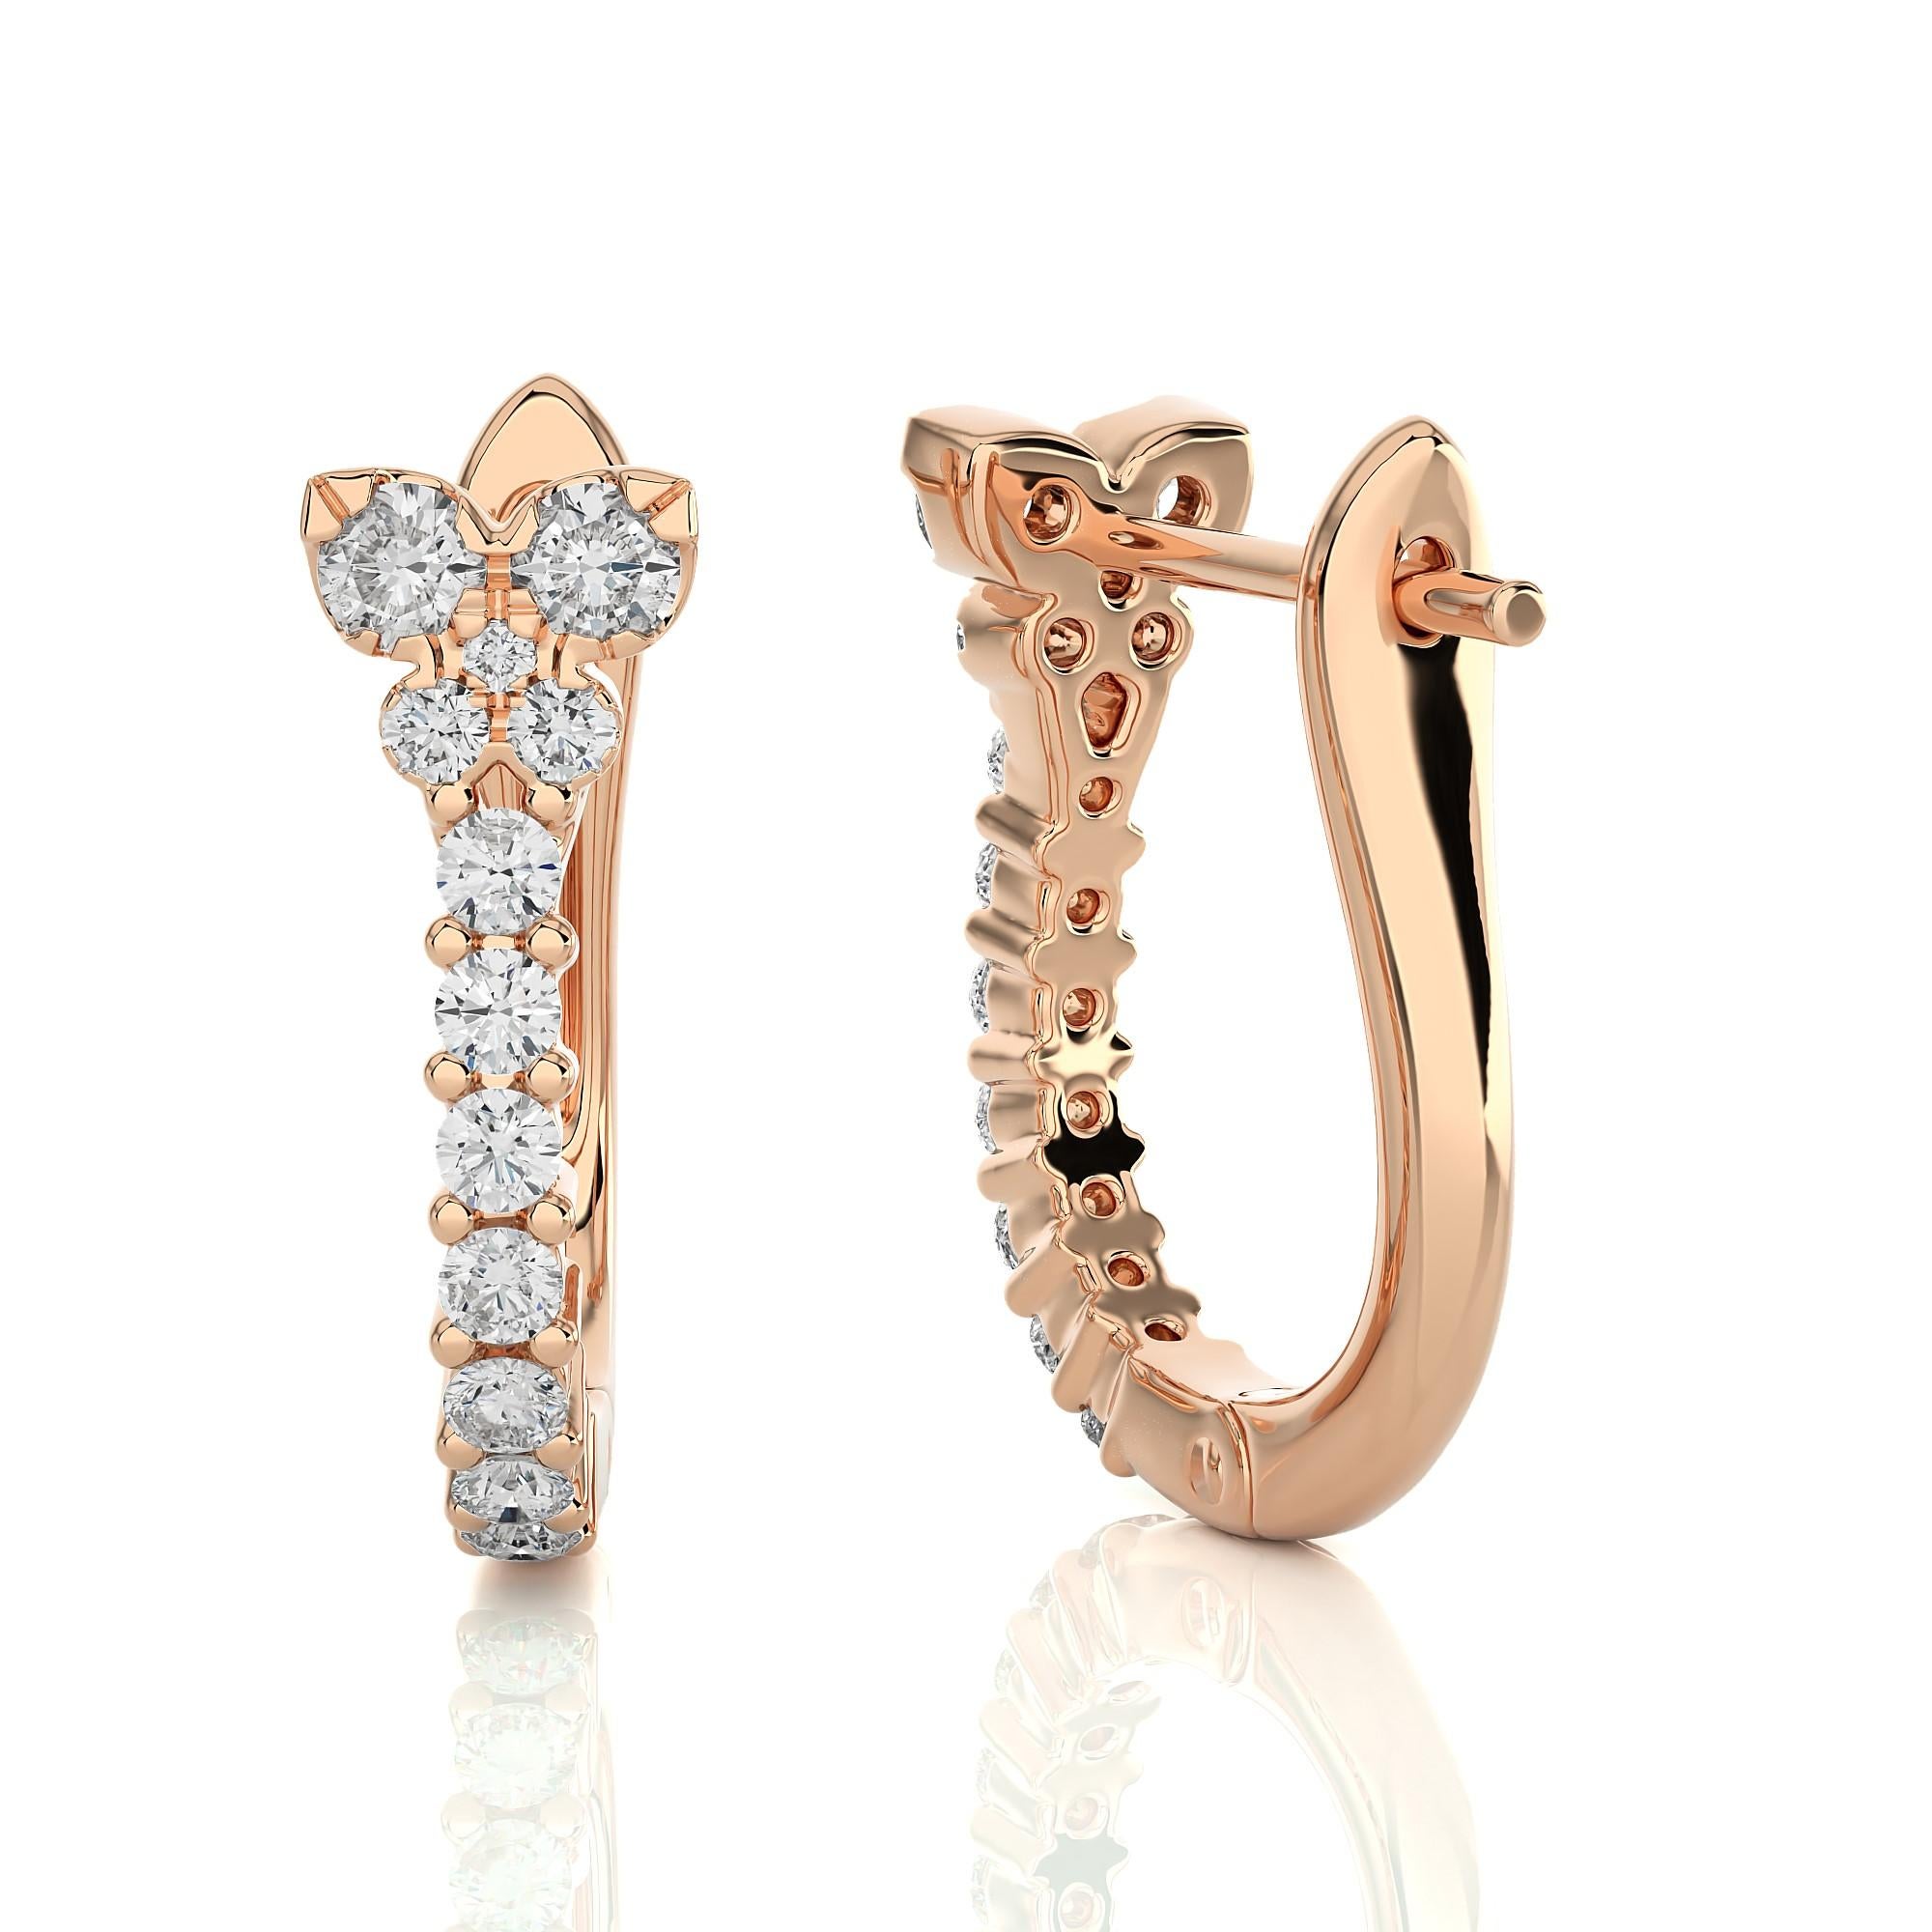 Modern Diamond And Pearl Huggie Earrings(0.31 Ct).

Within this cosmic duo, a row of diamonds with a butterfly design on the top aligns like twinkling stars in the night sky, flawlessly nestled in a classic 4-prong setting, embracing their